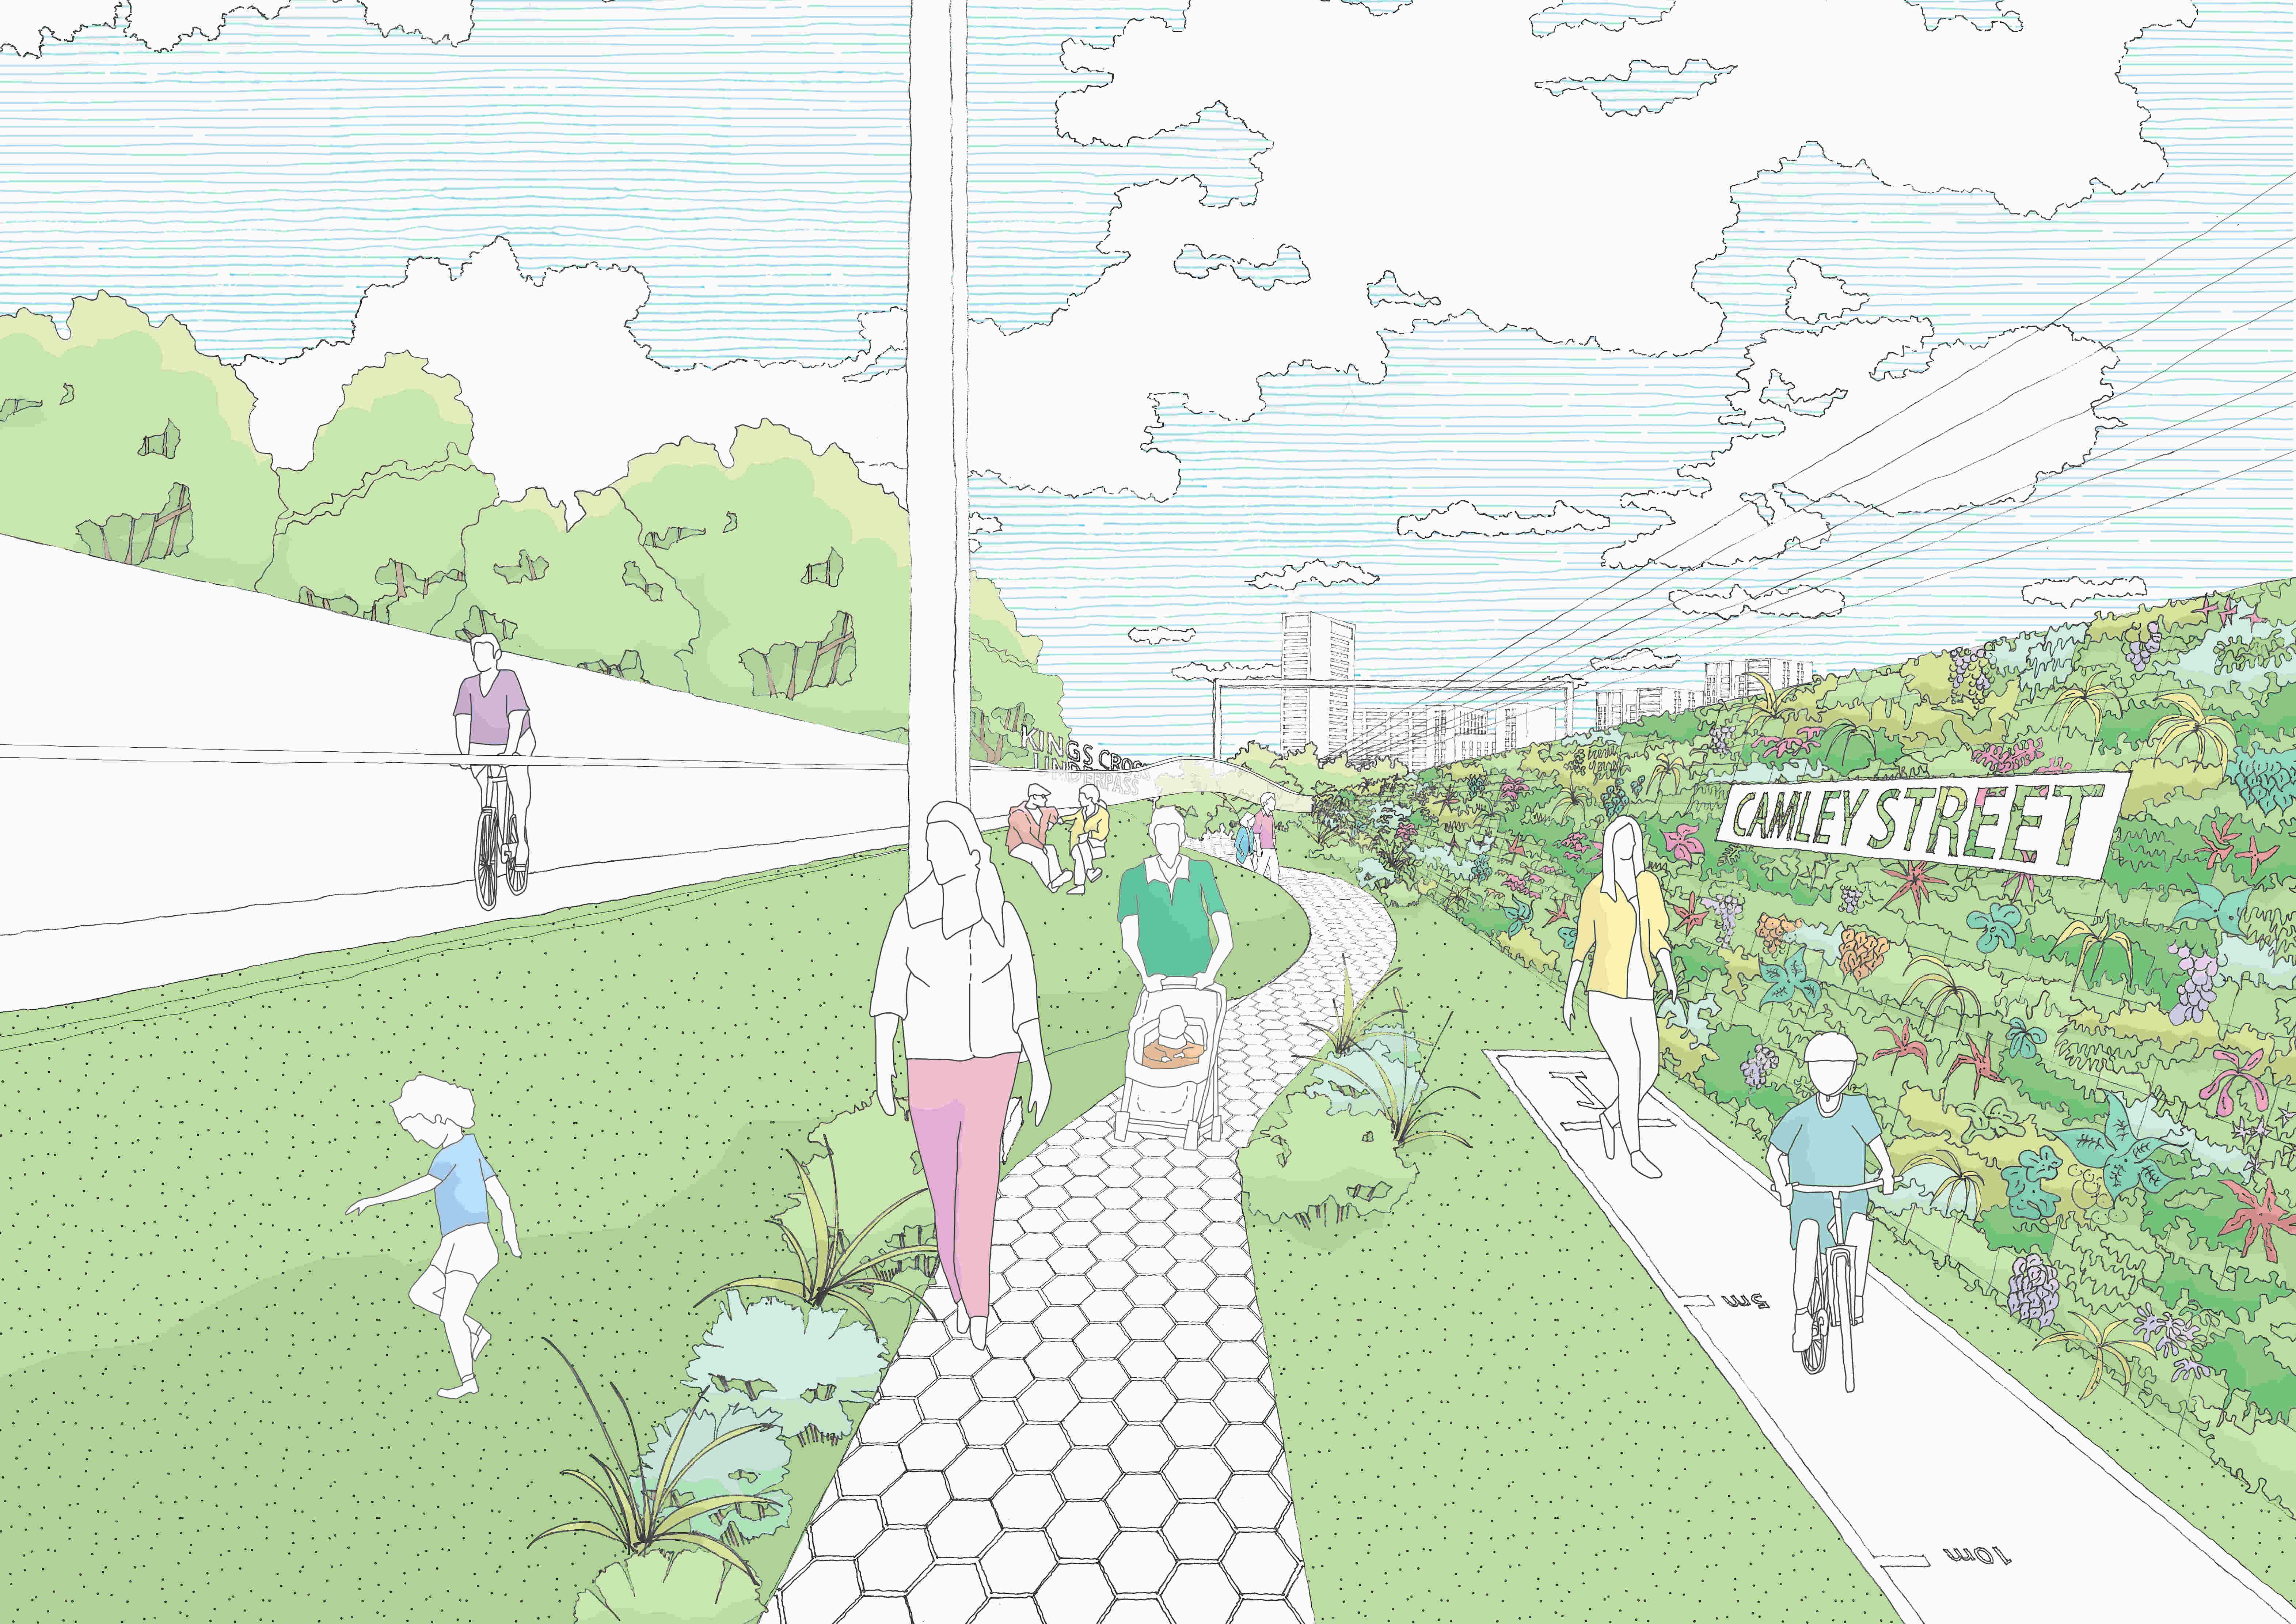 The Camden Highline will feature a walkway for pedestrians and cyclists. Image by Camden Town Unlimited.